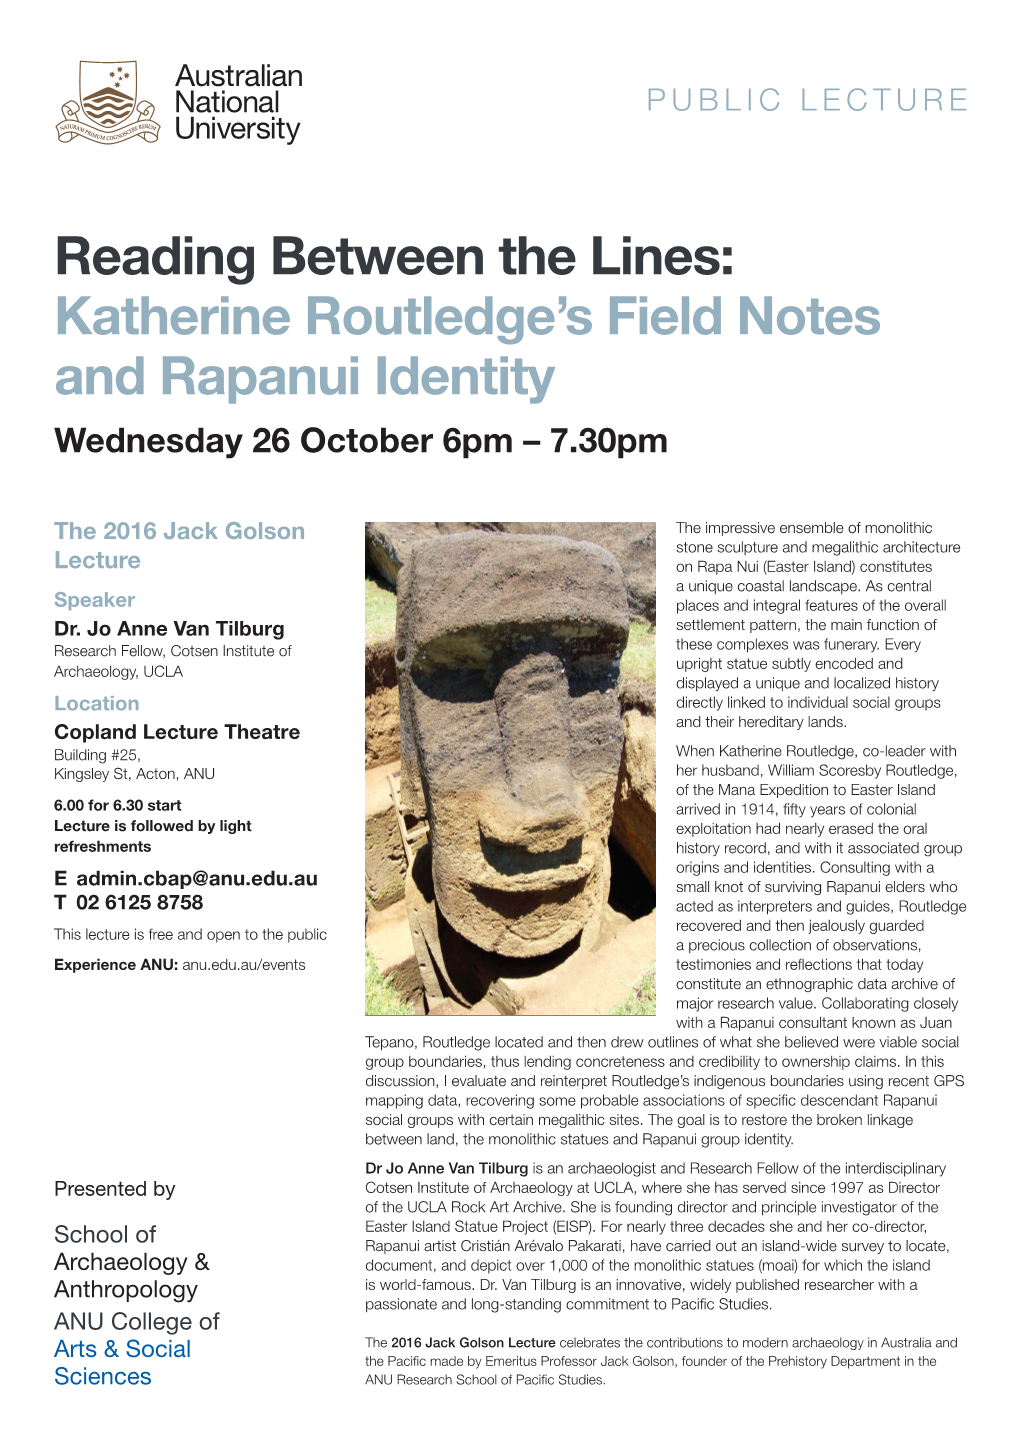 Katherine Routledge's Field Notes and Rapanui Identity